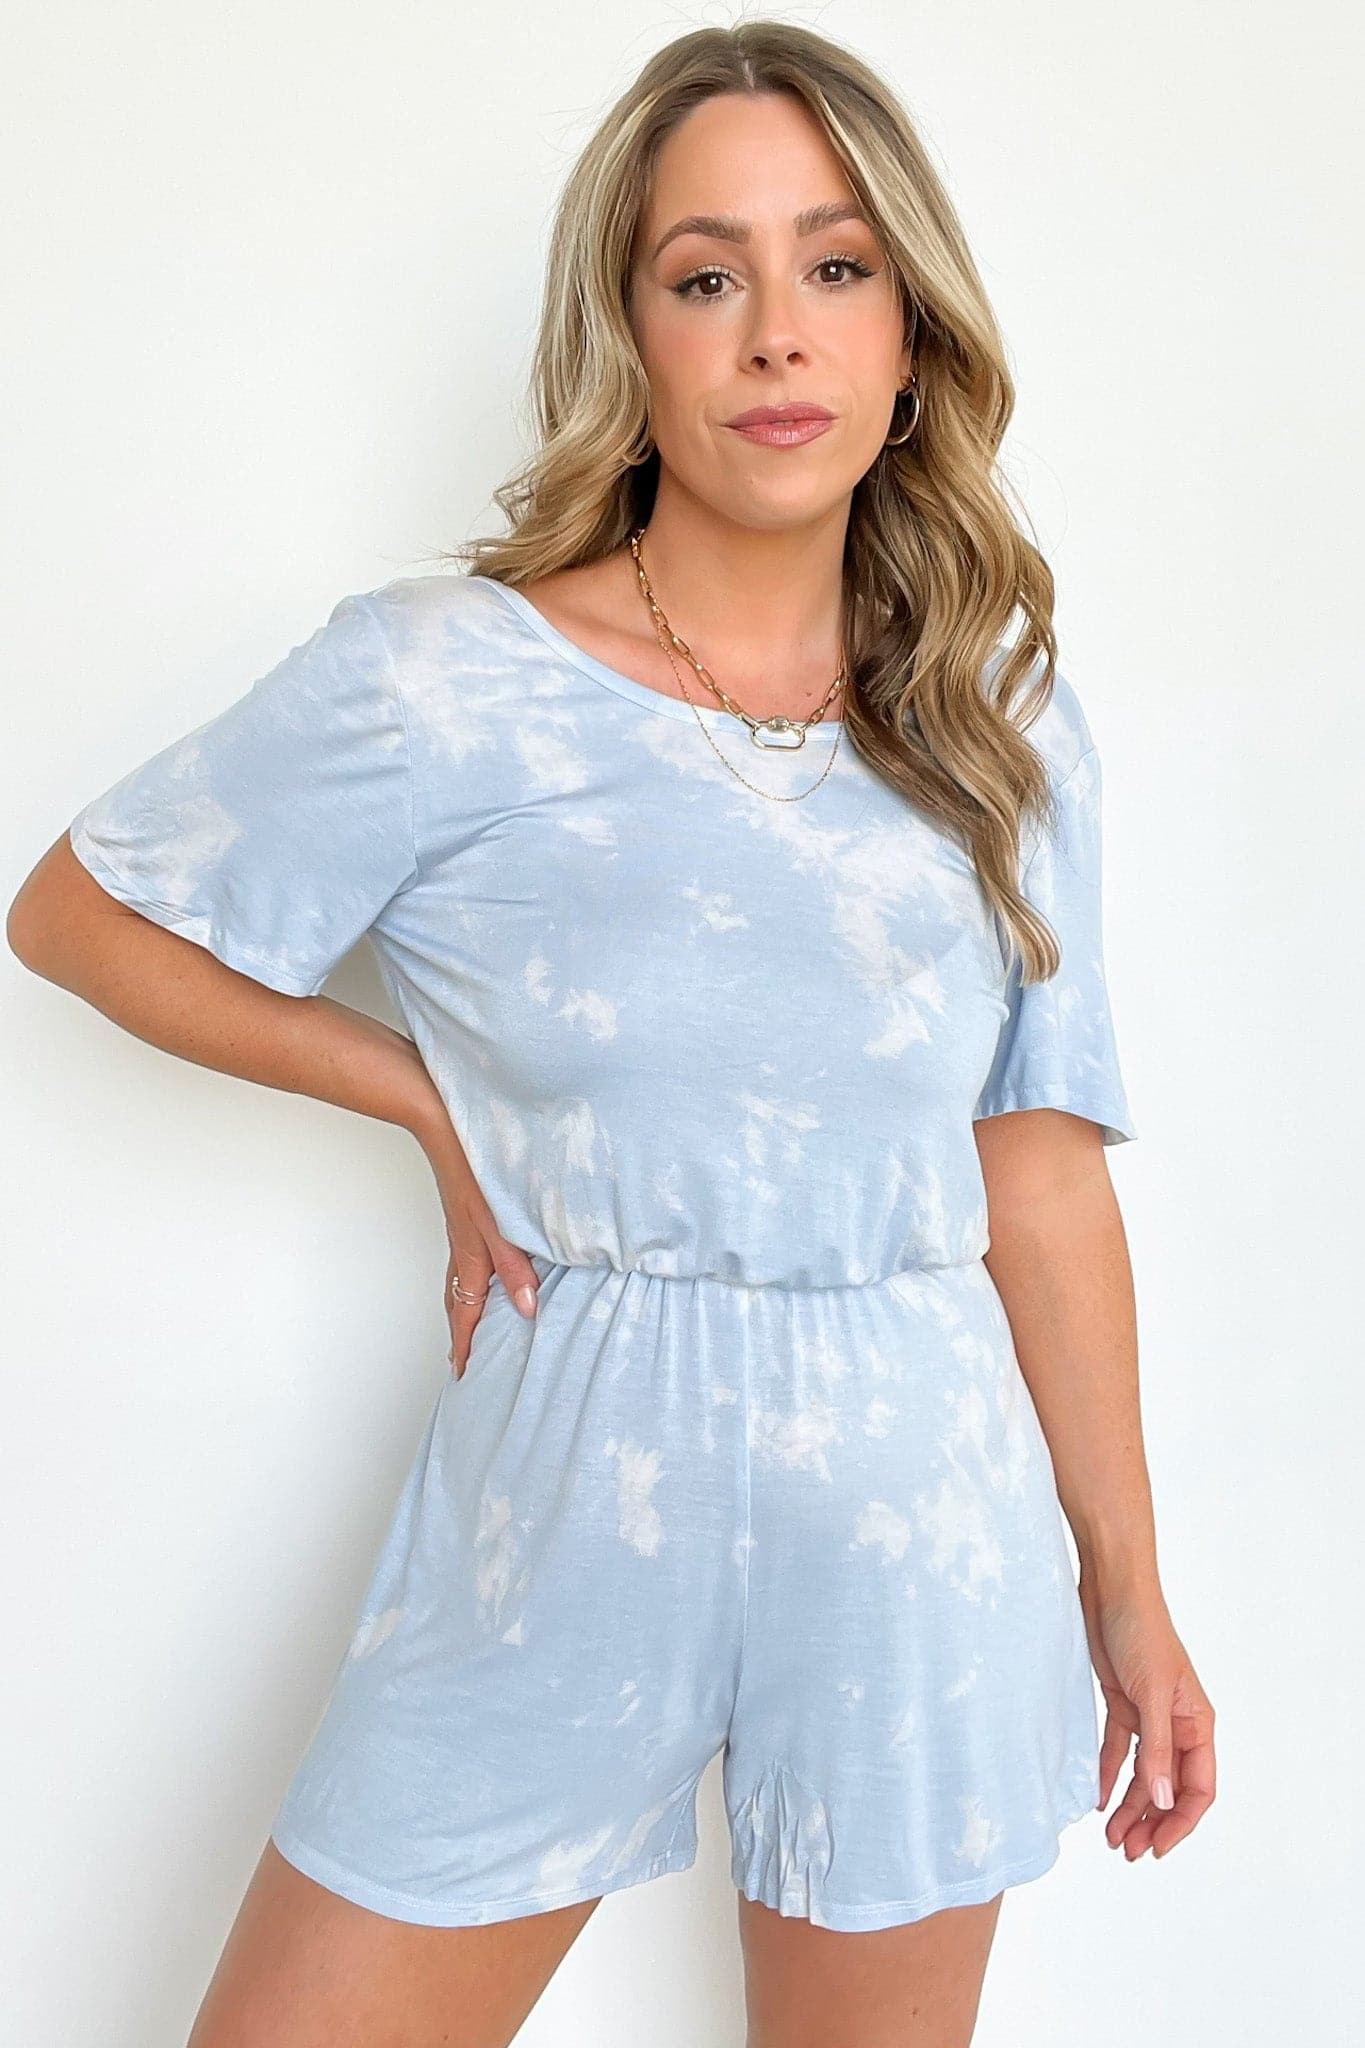  Addyna Cloudwash Open Back Romper - FINAL SALE - Madison and Mallory